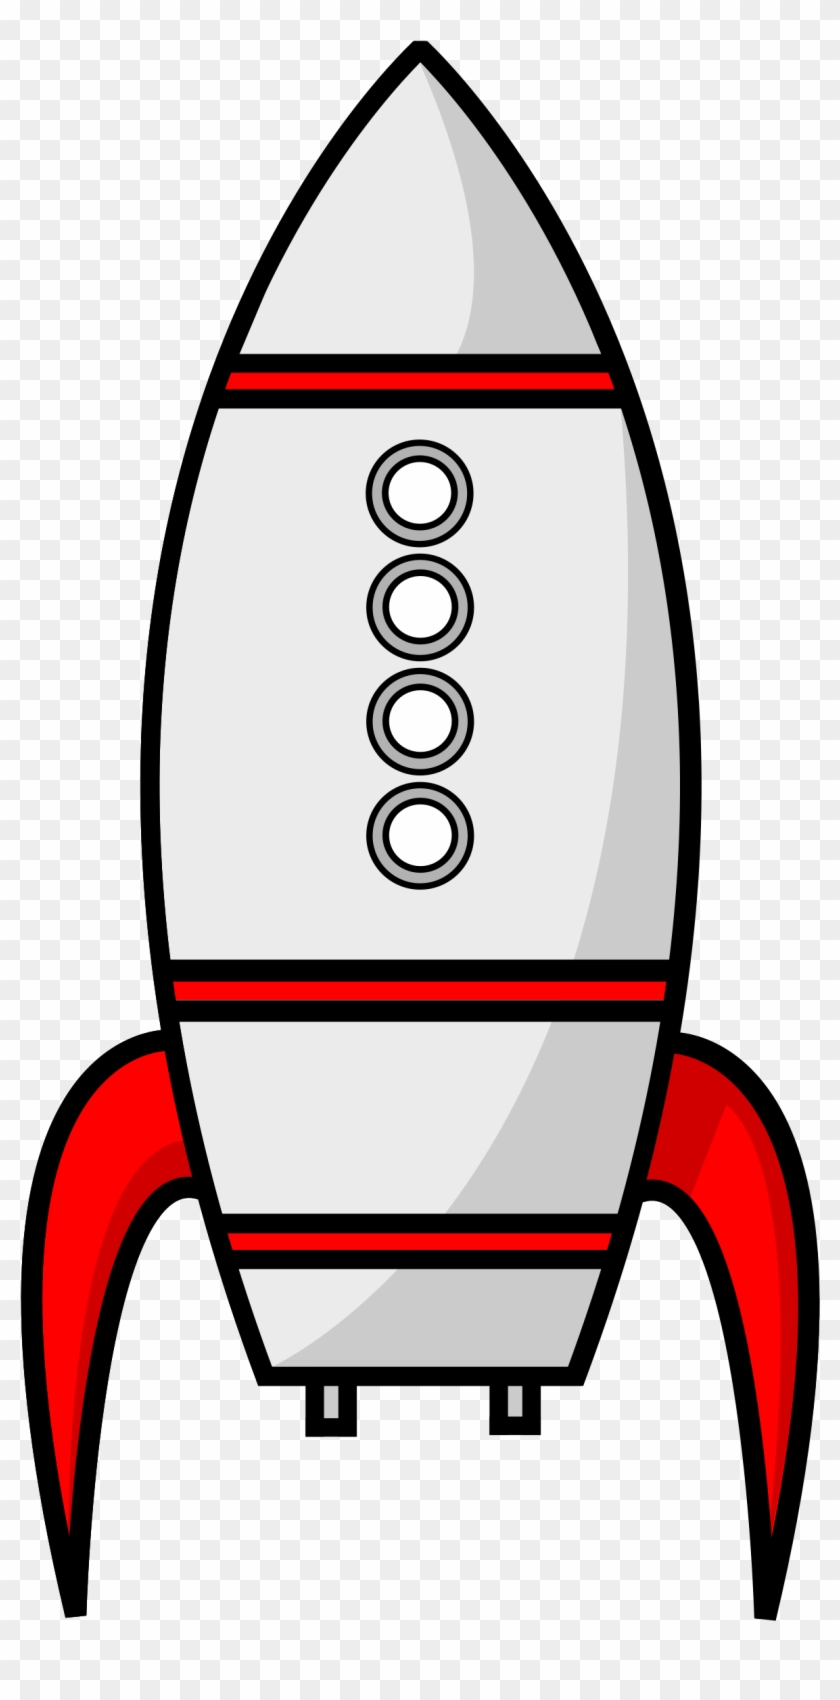 This Free Icons Png Design Of Cartoon Moon Rocket Remix - Space Ship Clip Art #269914